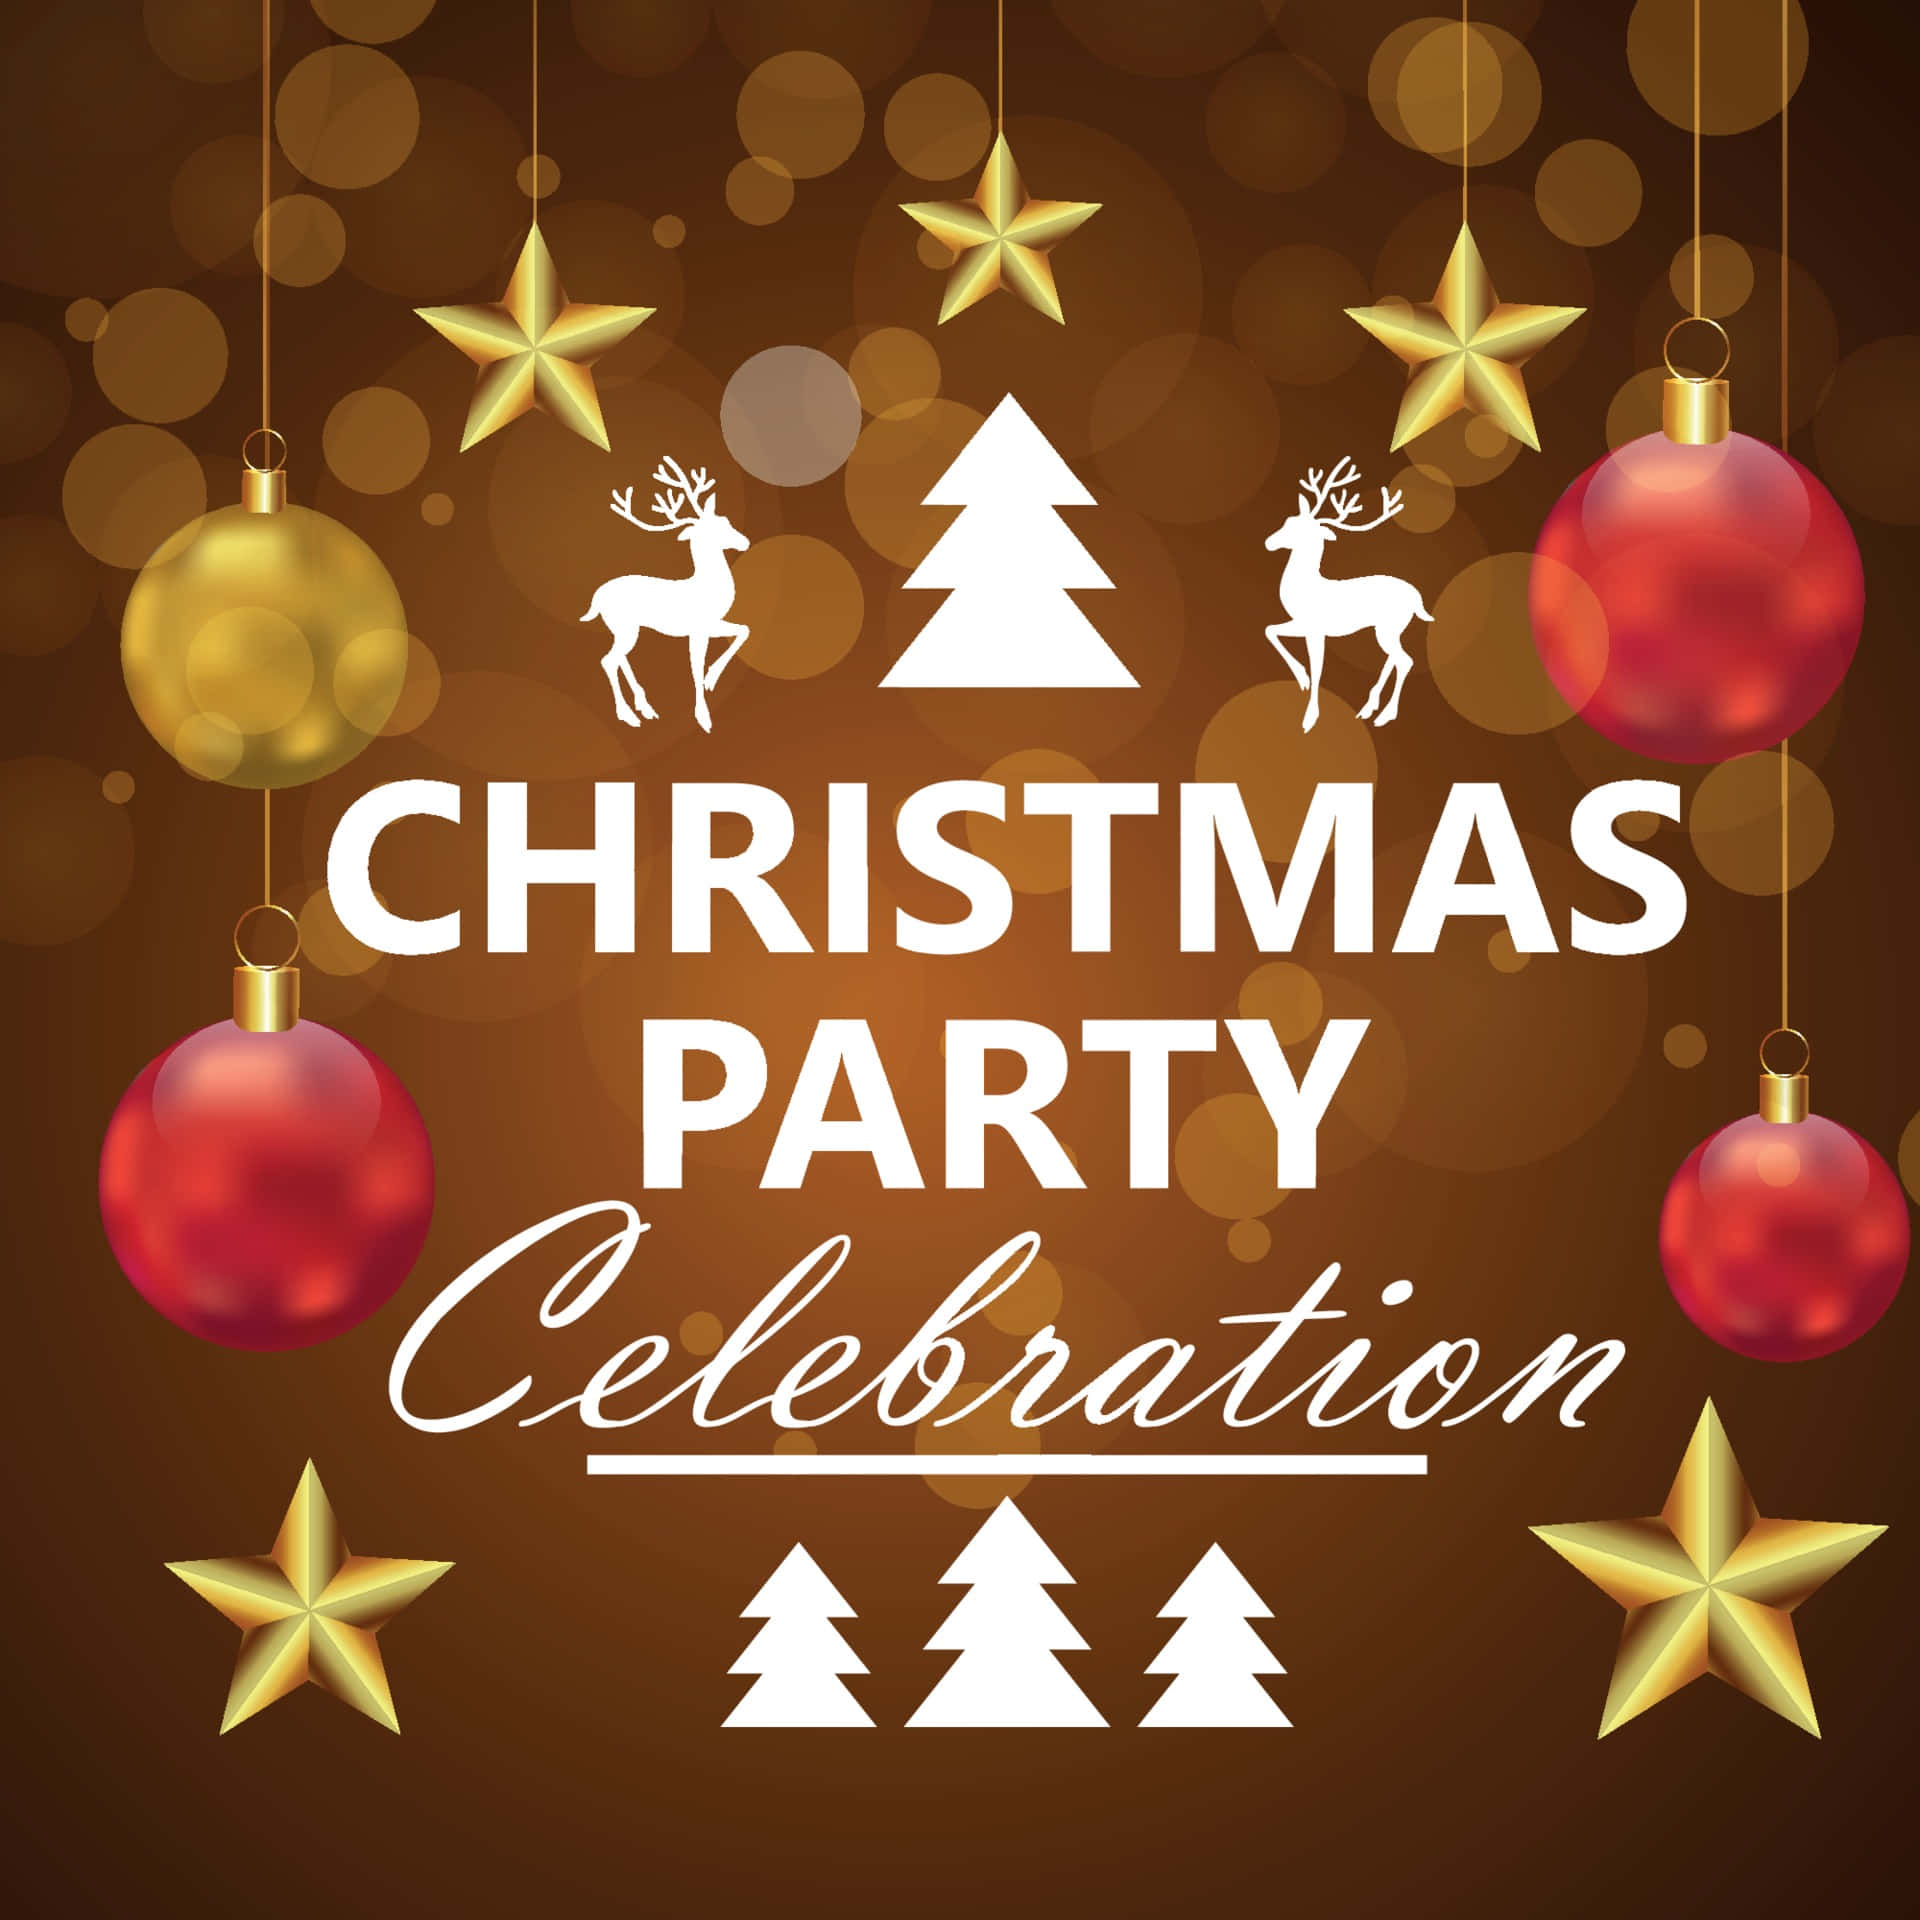 Get festive at your Christmas party with friends and family!